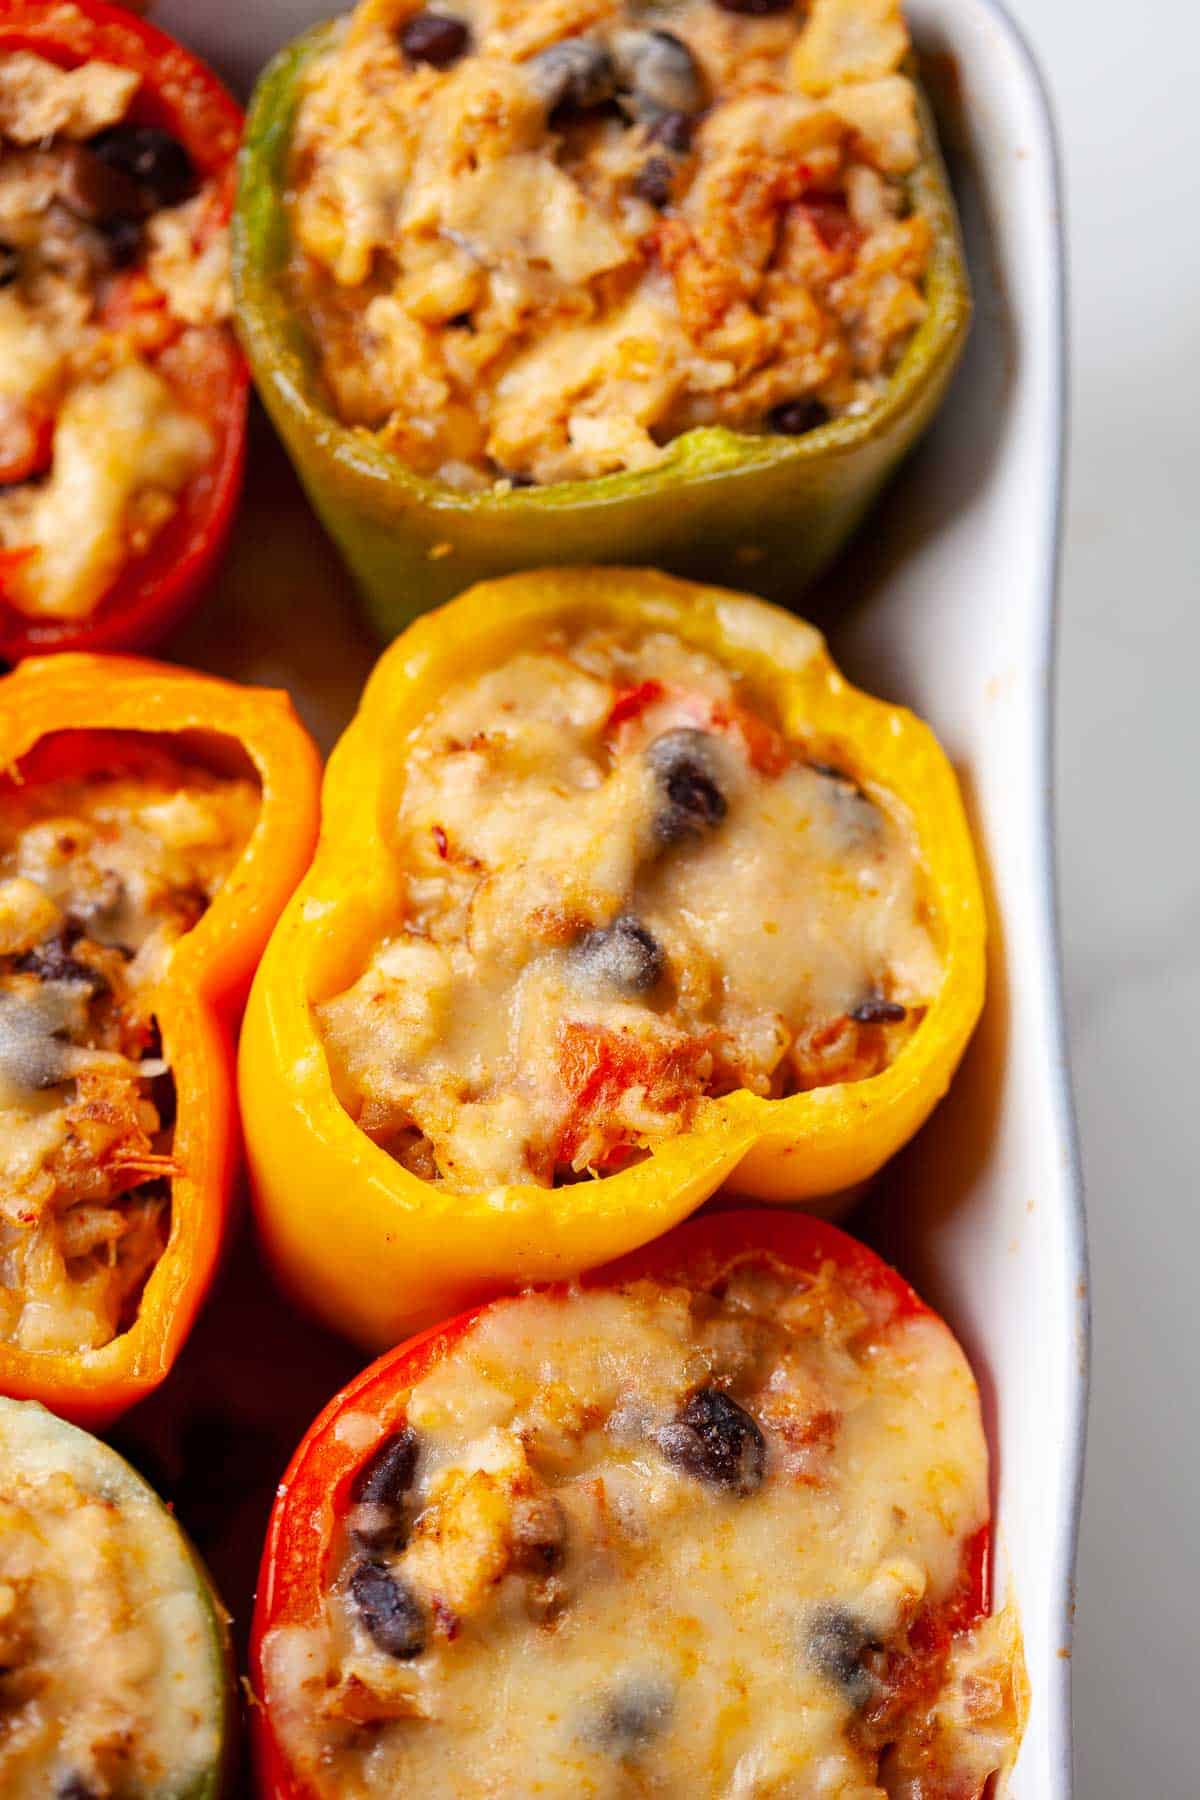 green yellow and red bell peppers stuffed with cheese and seafood in baking dish